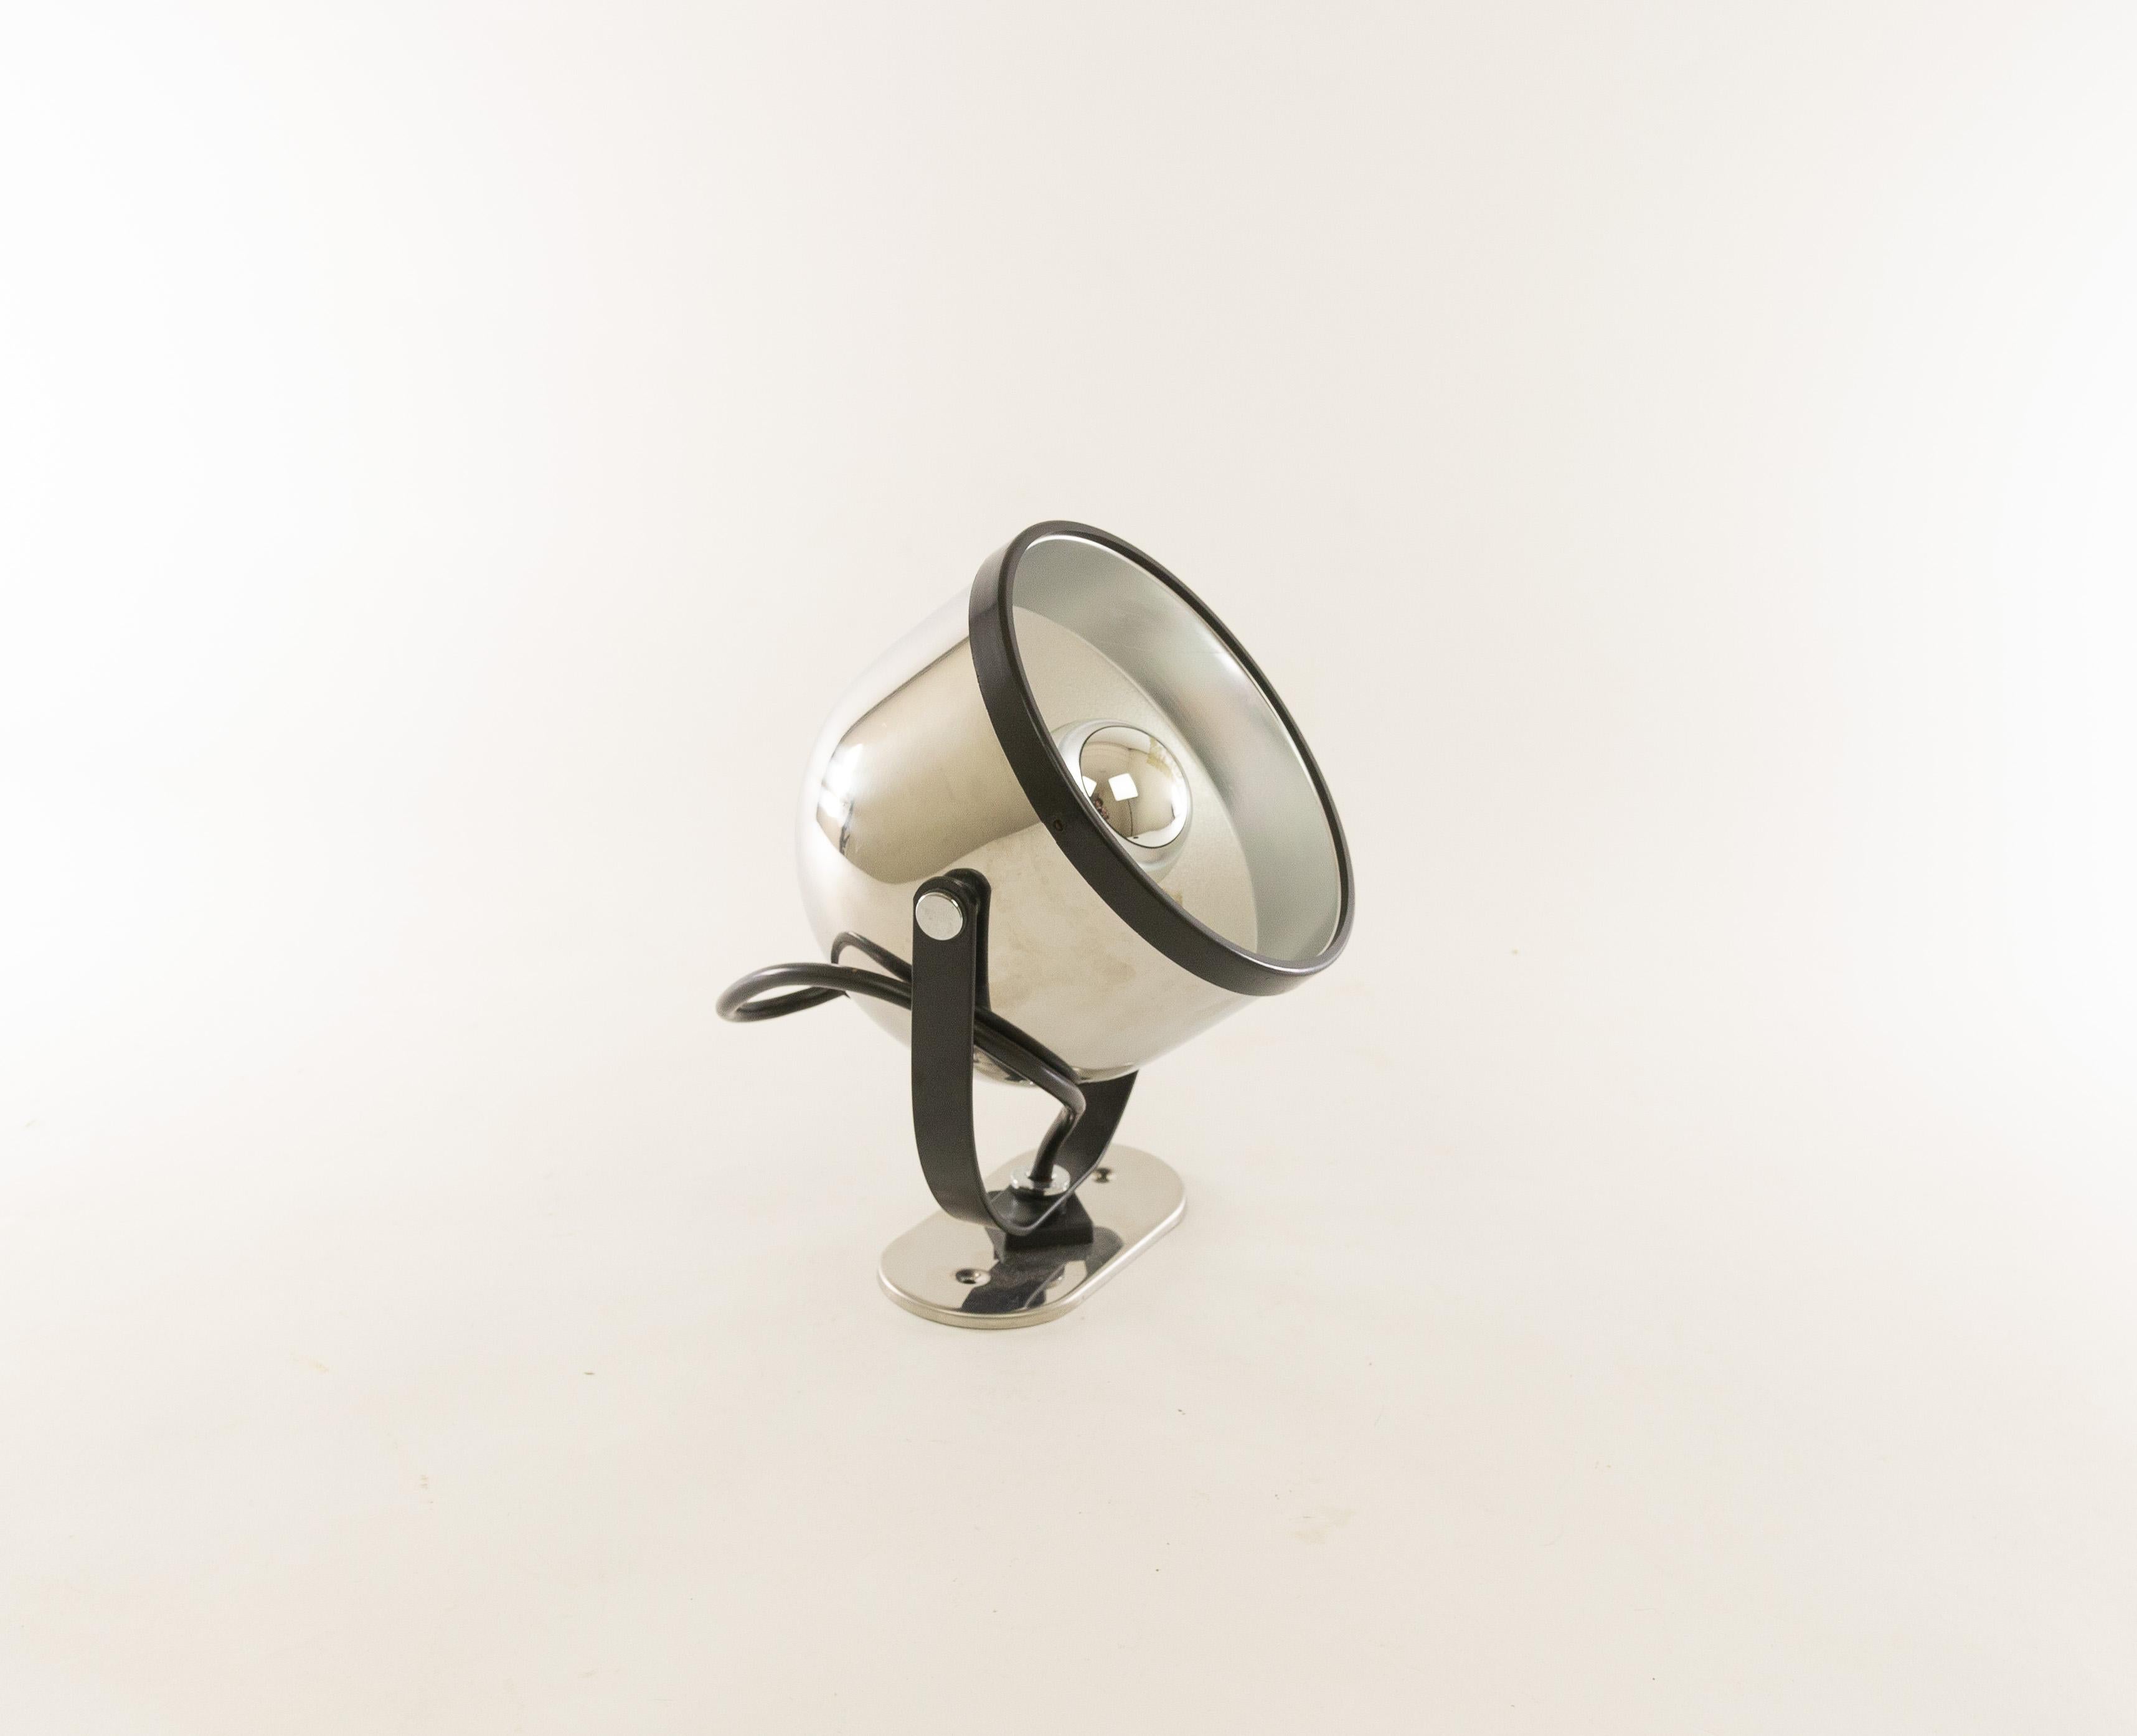 Swiveling wall spot of chromed metal designed by Gae Aulenti and Livio Castiglioni for Stilnovo in the 1970s.

As described in a Stilnovo catalogue this lamp has been designed in various versions: 